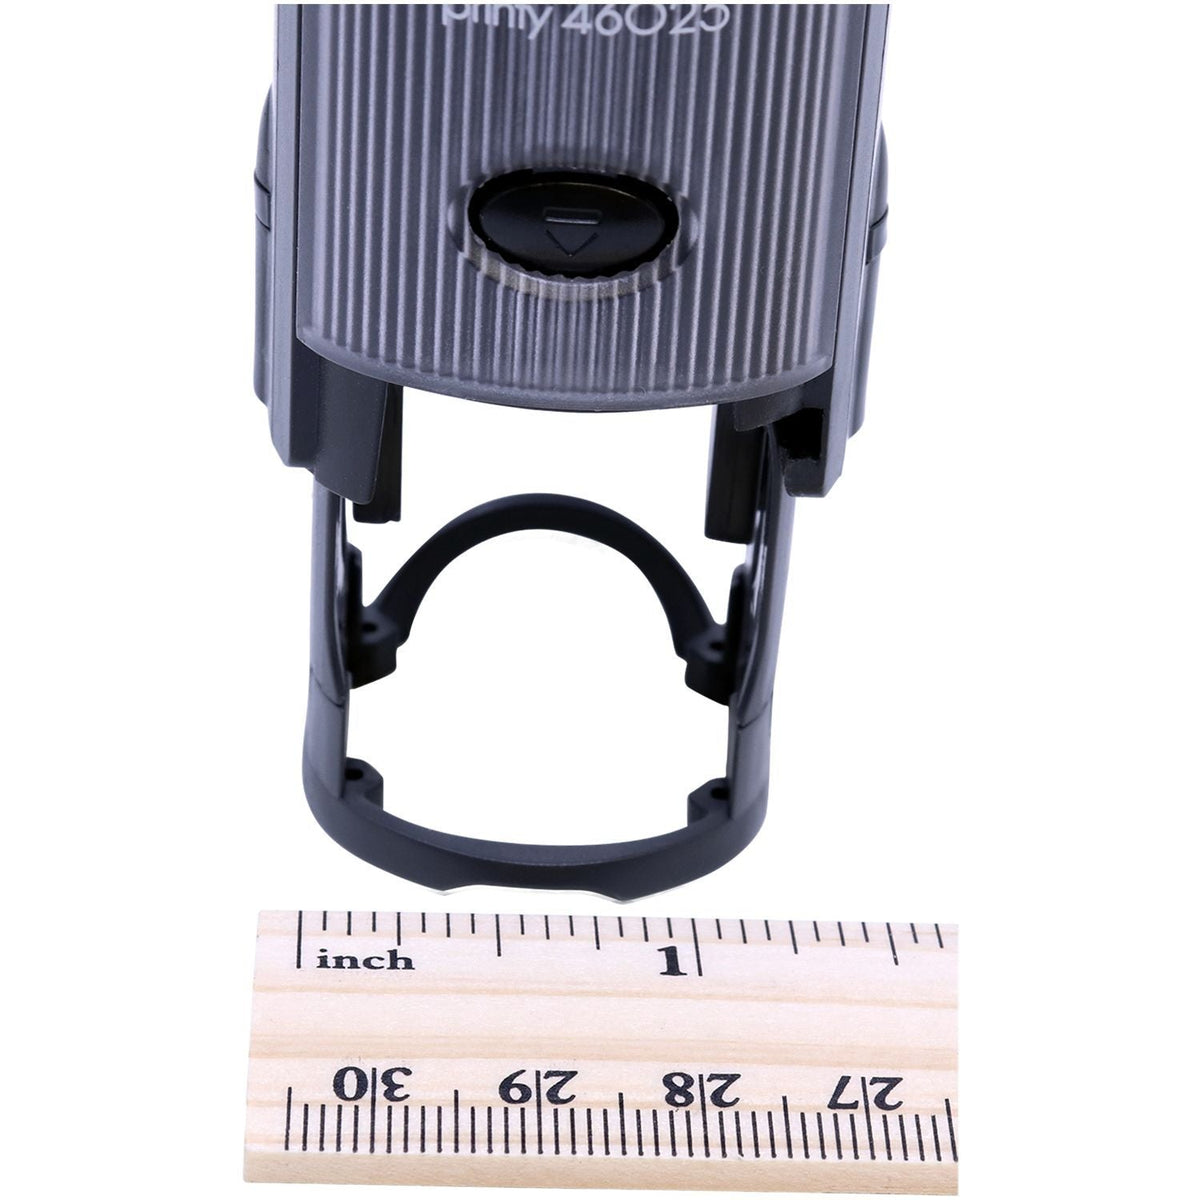 Measurment of Self-Inking Round OK Stamp with Ruler